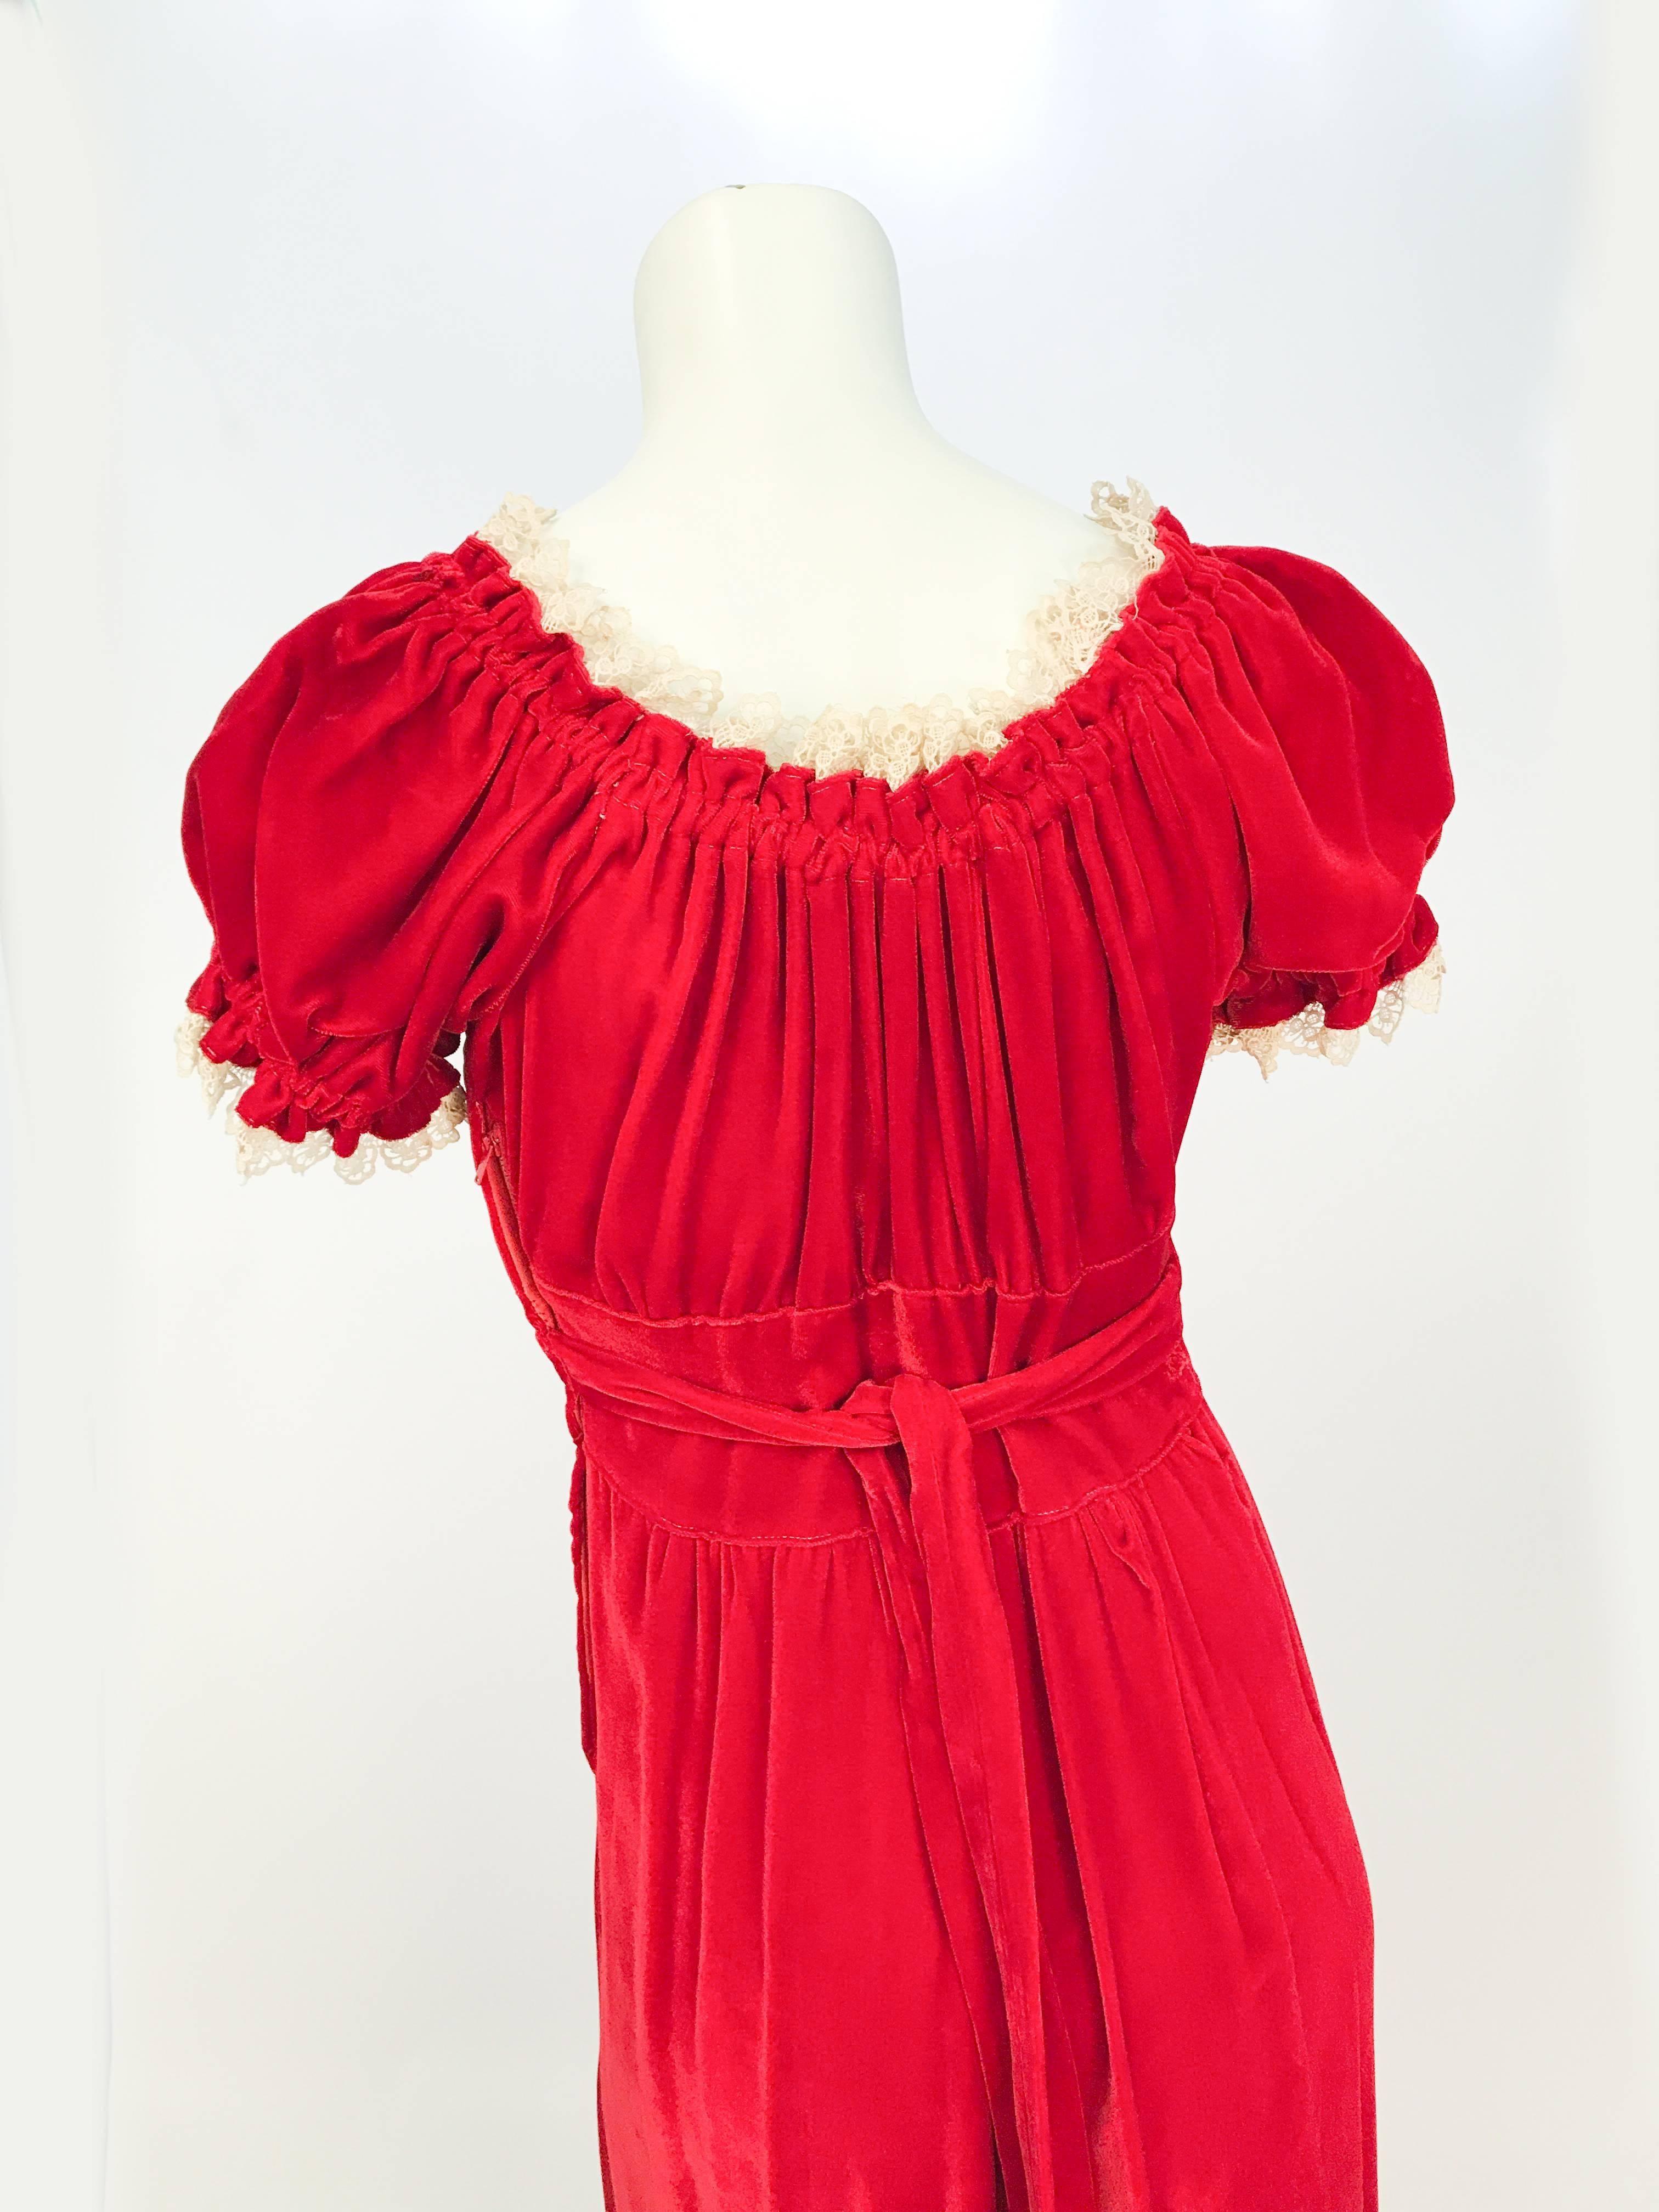 Women's 1930s Red Velvet and Lace Bias Cut Dress